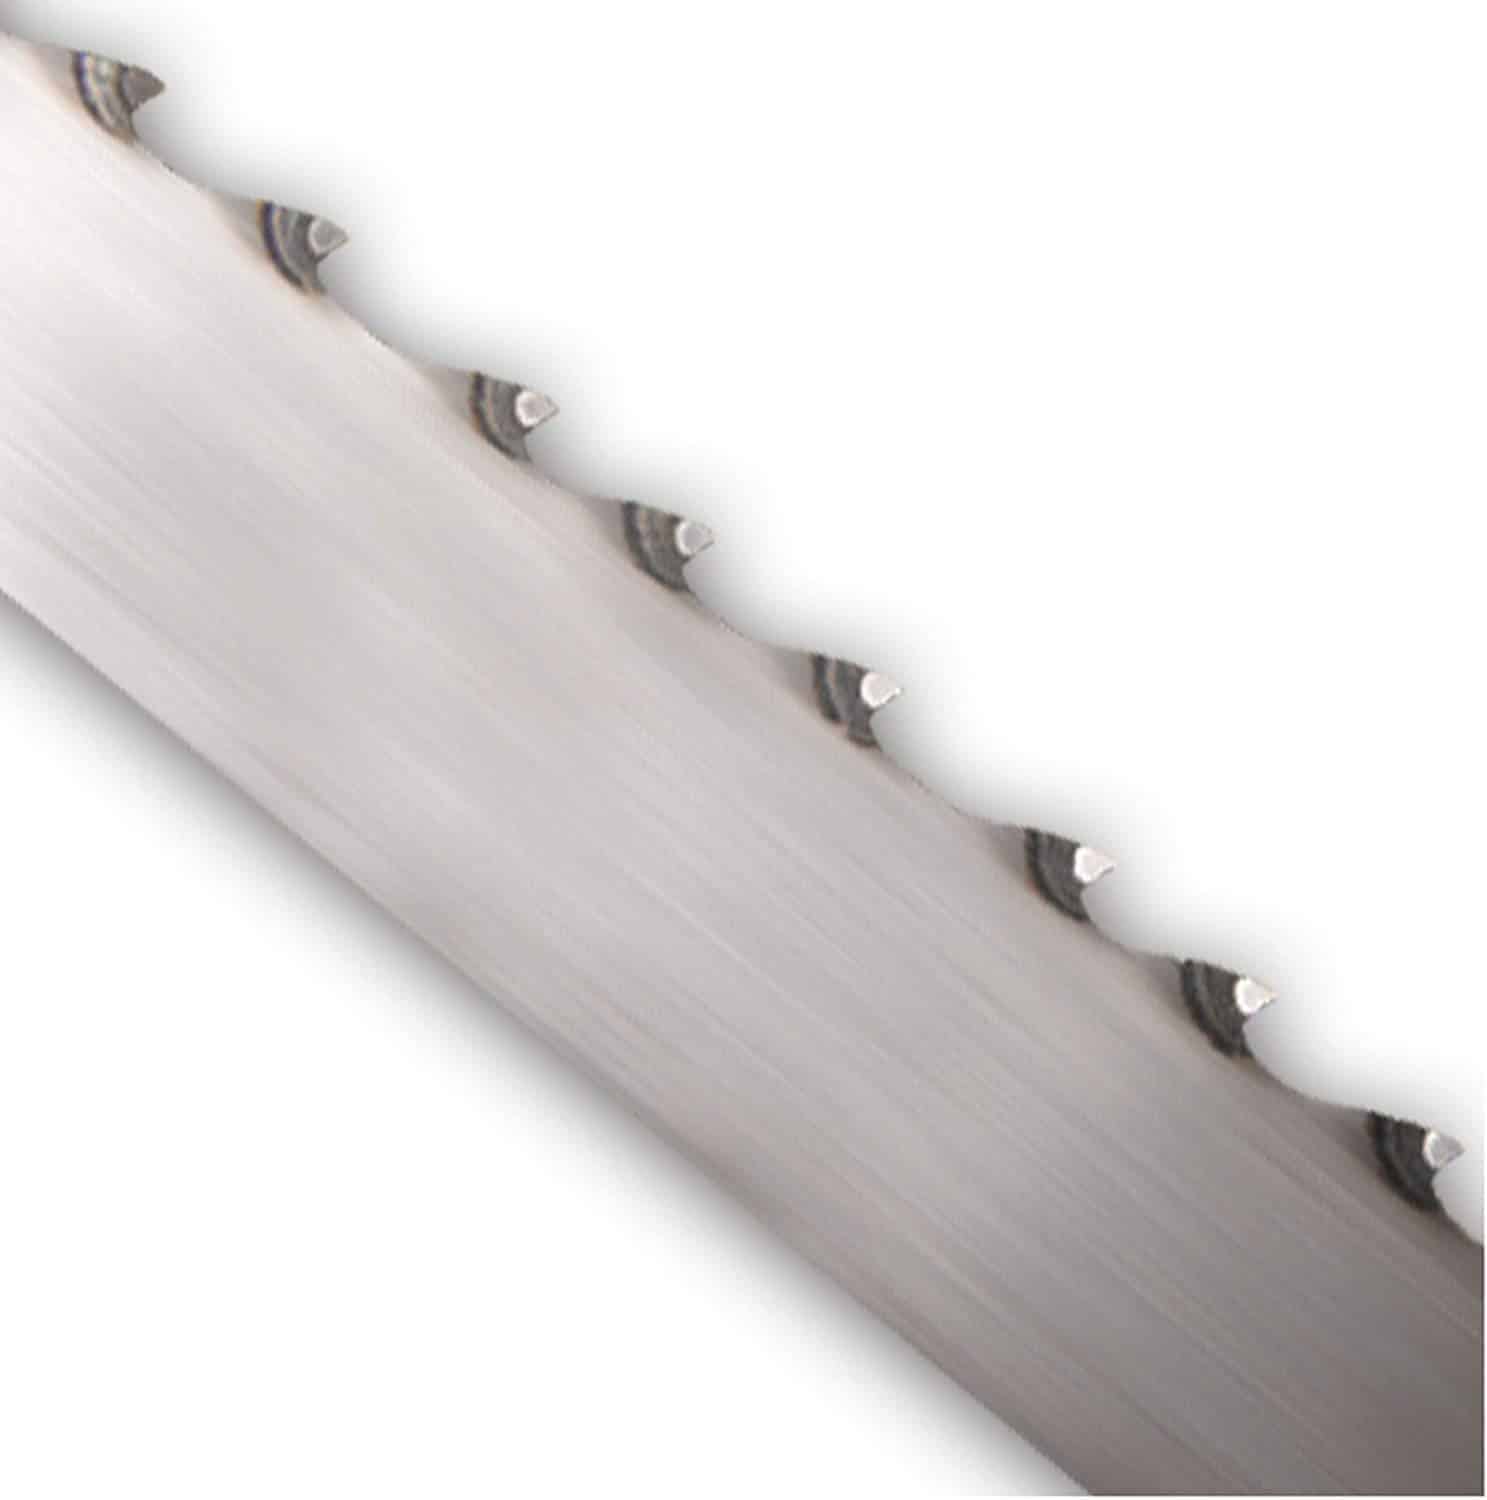 5 Best Bandsaw Blades Review 2022(Tried&Tested)